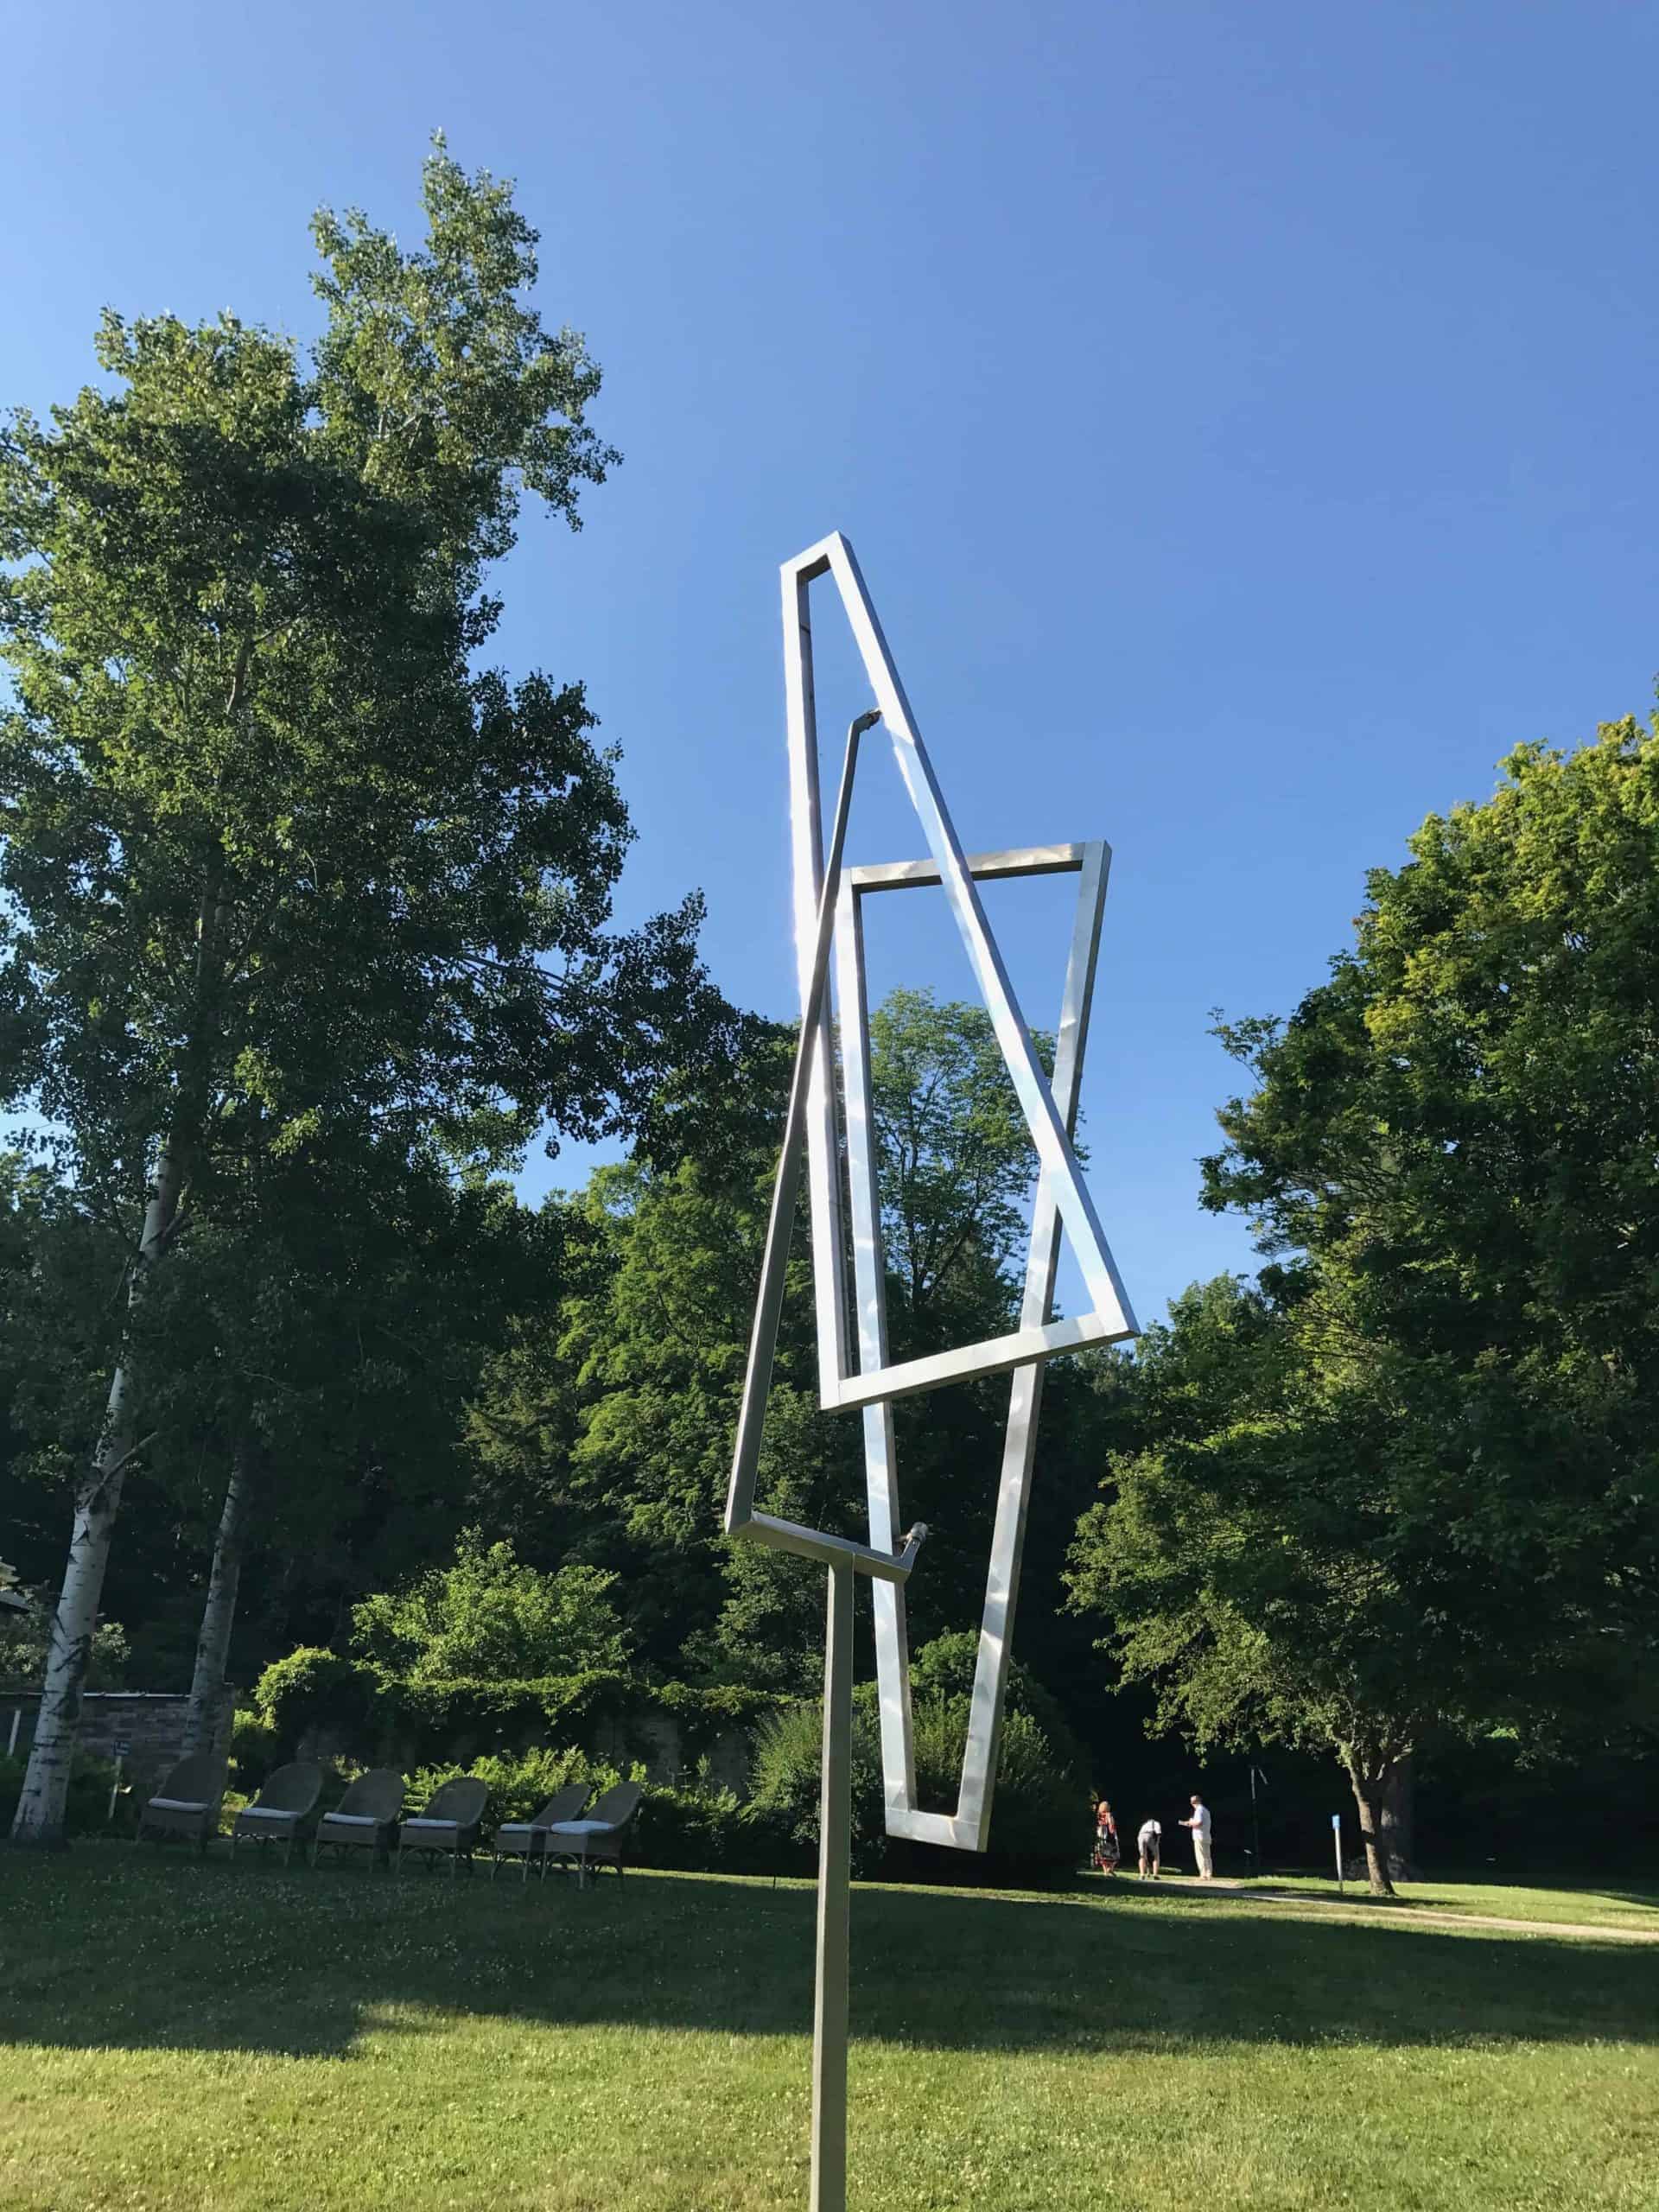 An angular George Rickey kinetic sculpture revolves at Chesterwood in Stockbridge, in summer 2018.